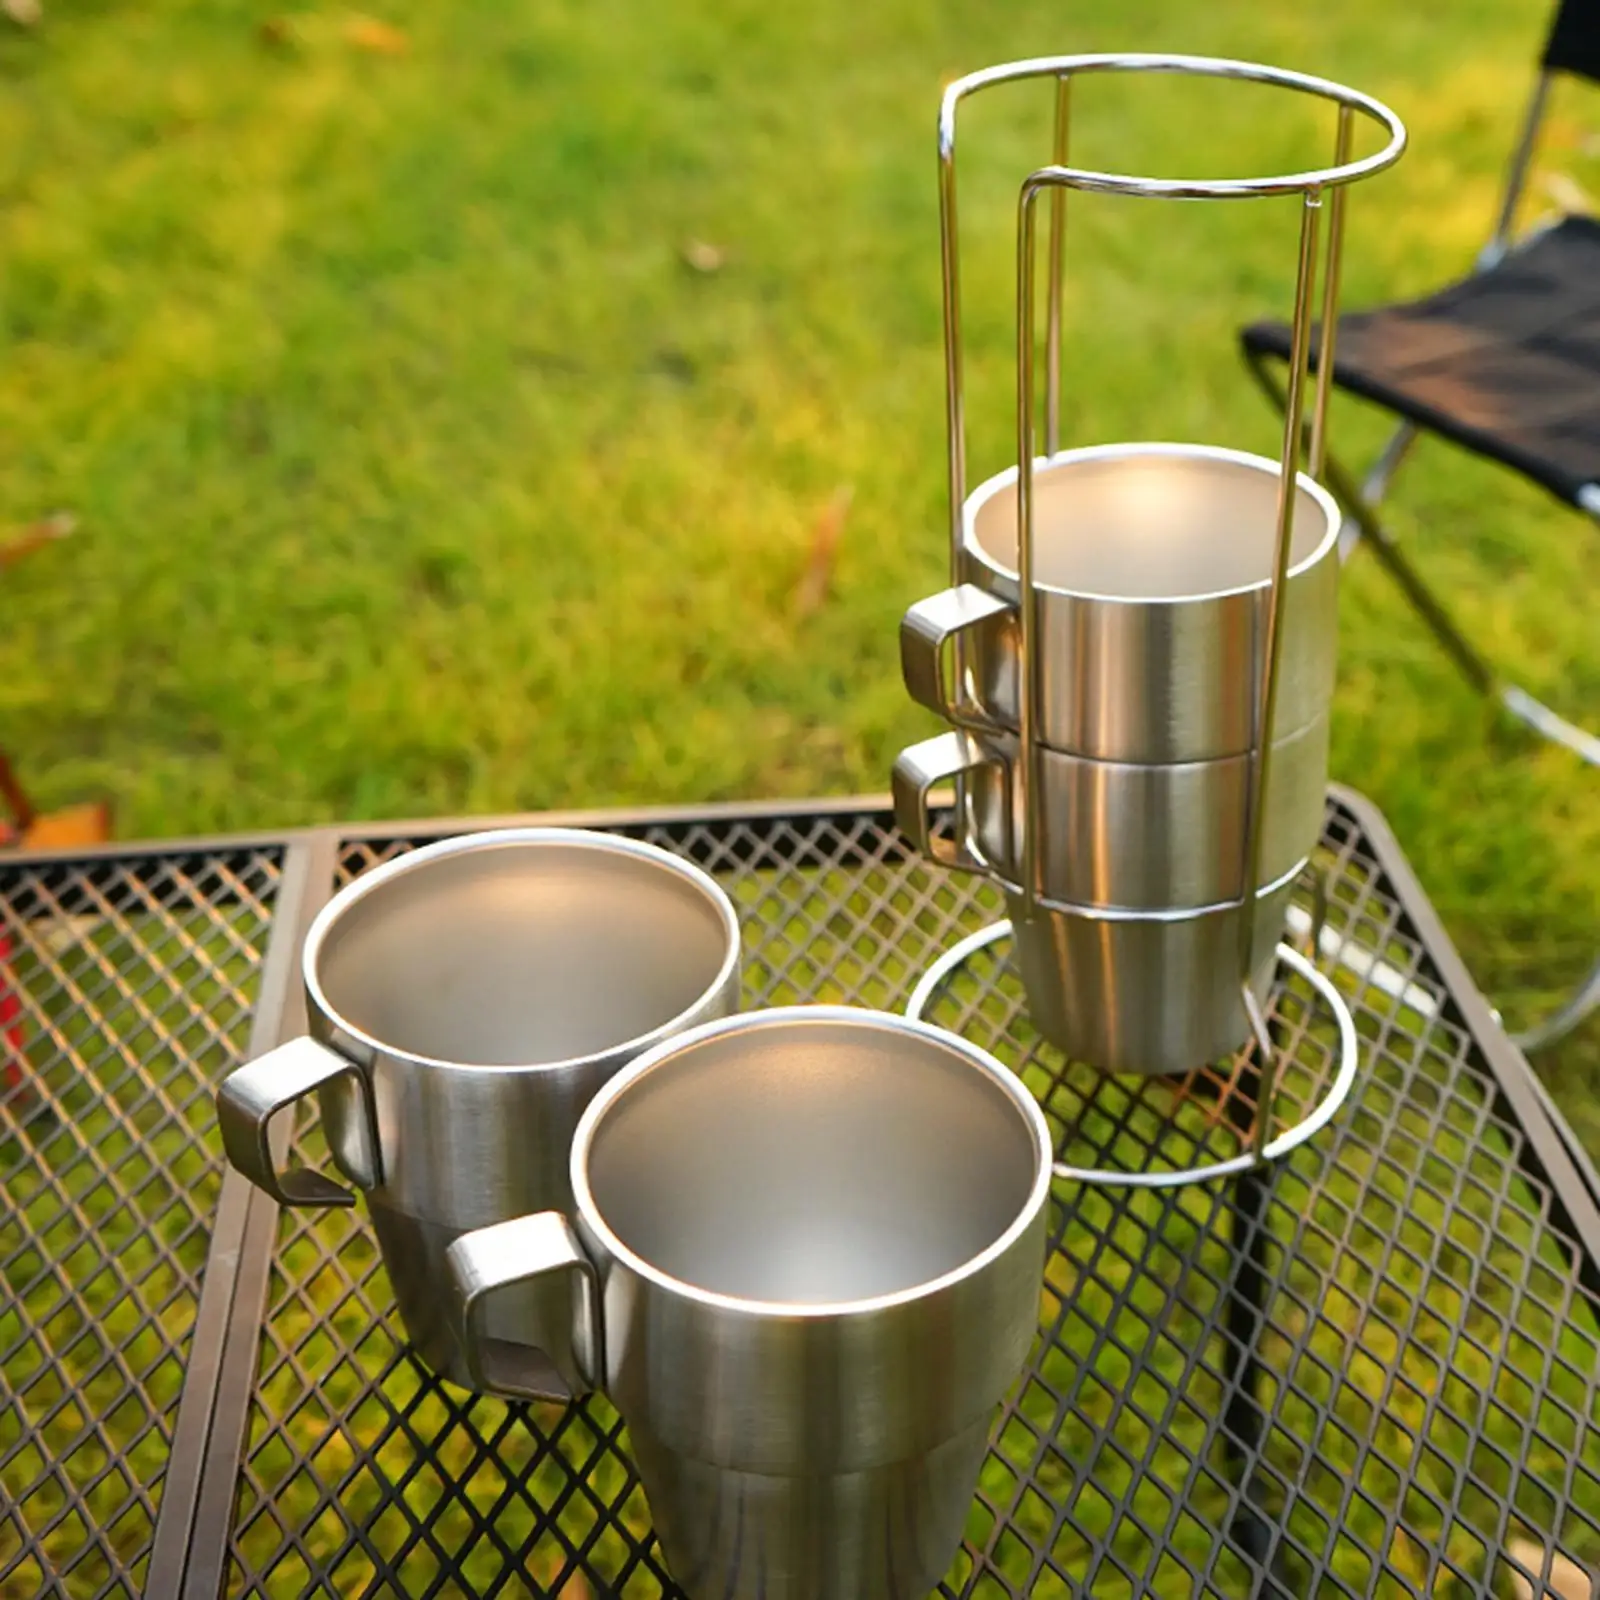 4Pcs Coffee Cups Double Layer Shatterproof Drinking Cups Stainless Steel Beer Mugs for for Ice Drinks/Hot Beverage 301-400ml